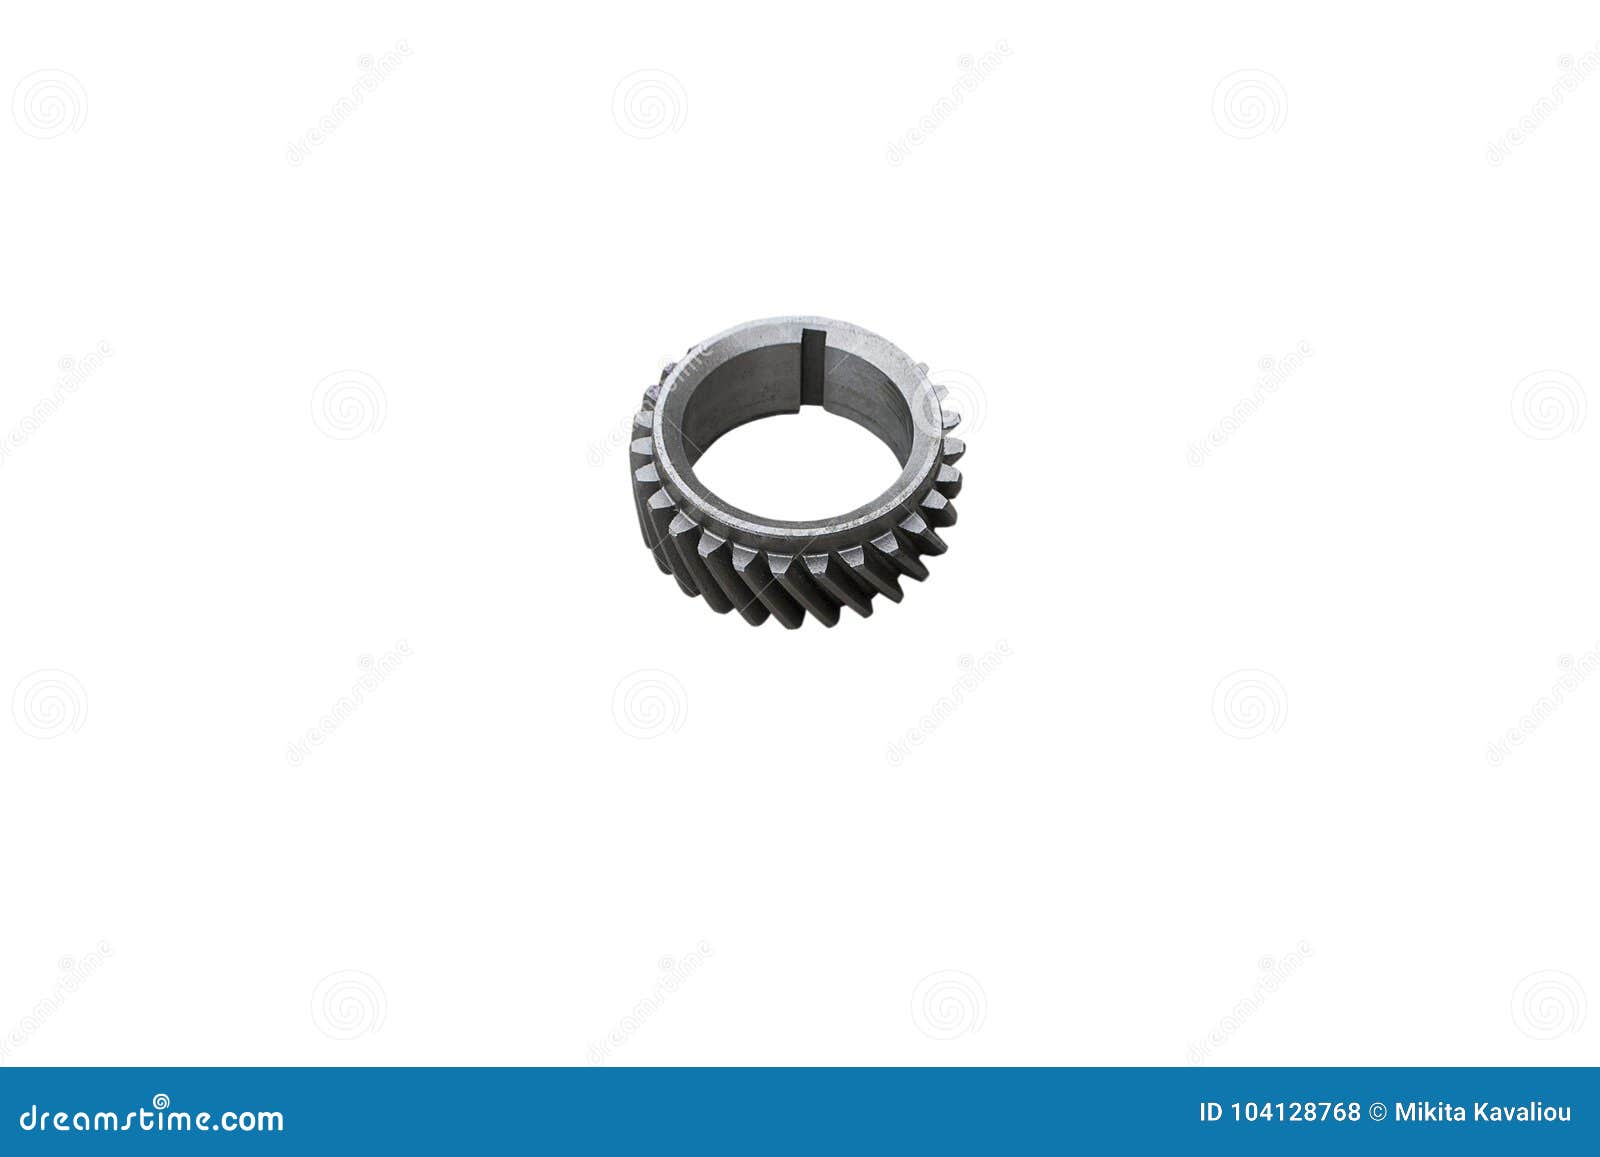 gear gearbox with a keyway